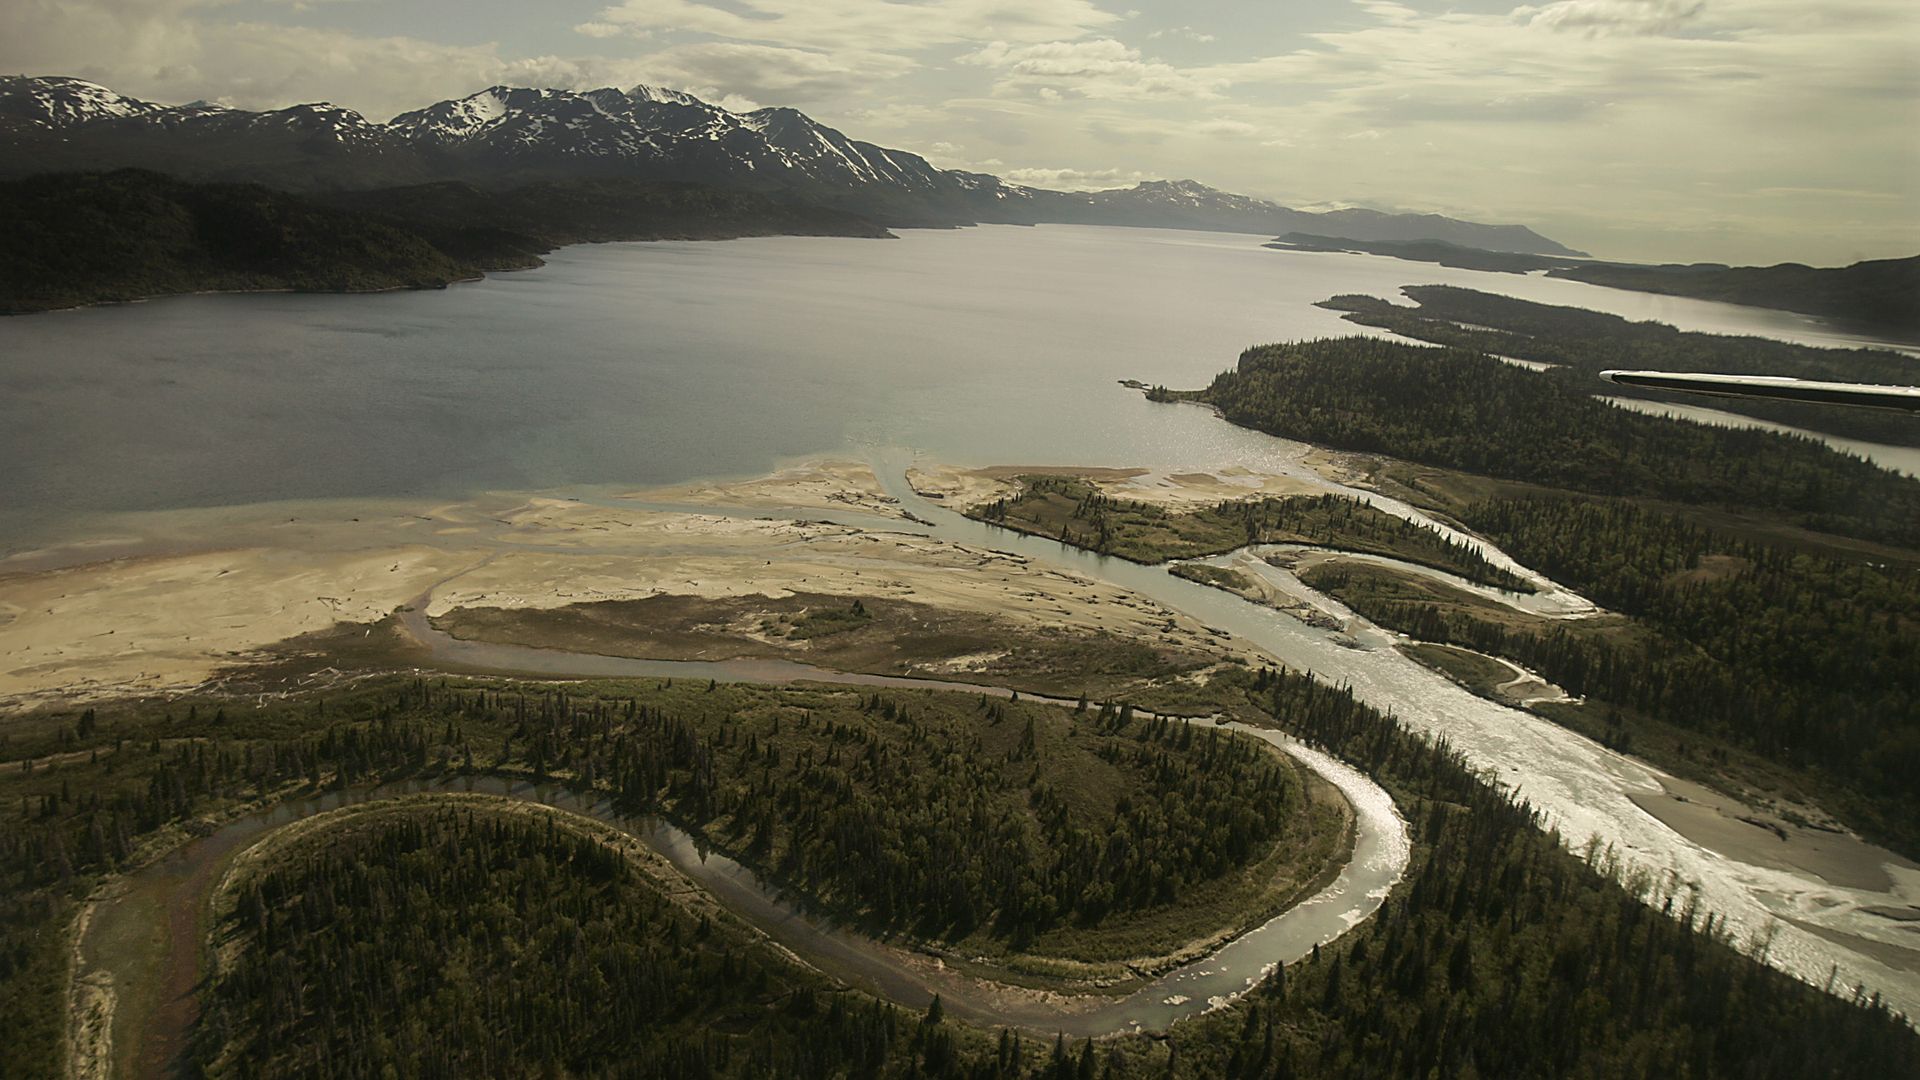 The Pile River flows into the northern end of Lake Iliamna, the largest lake in the state of Alaska, covering about 1,000 square miles. 